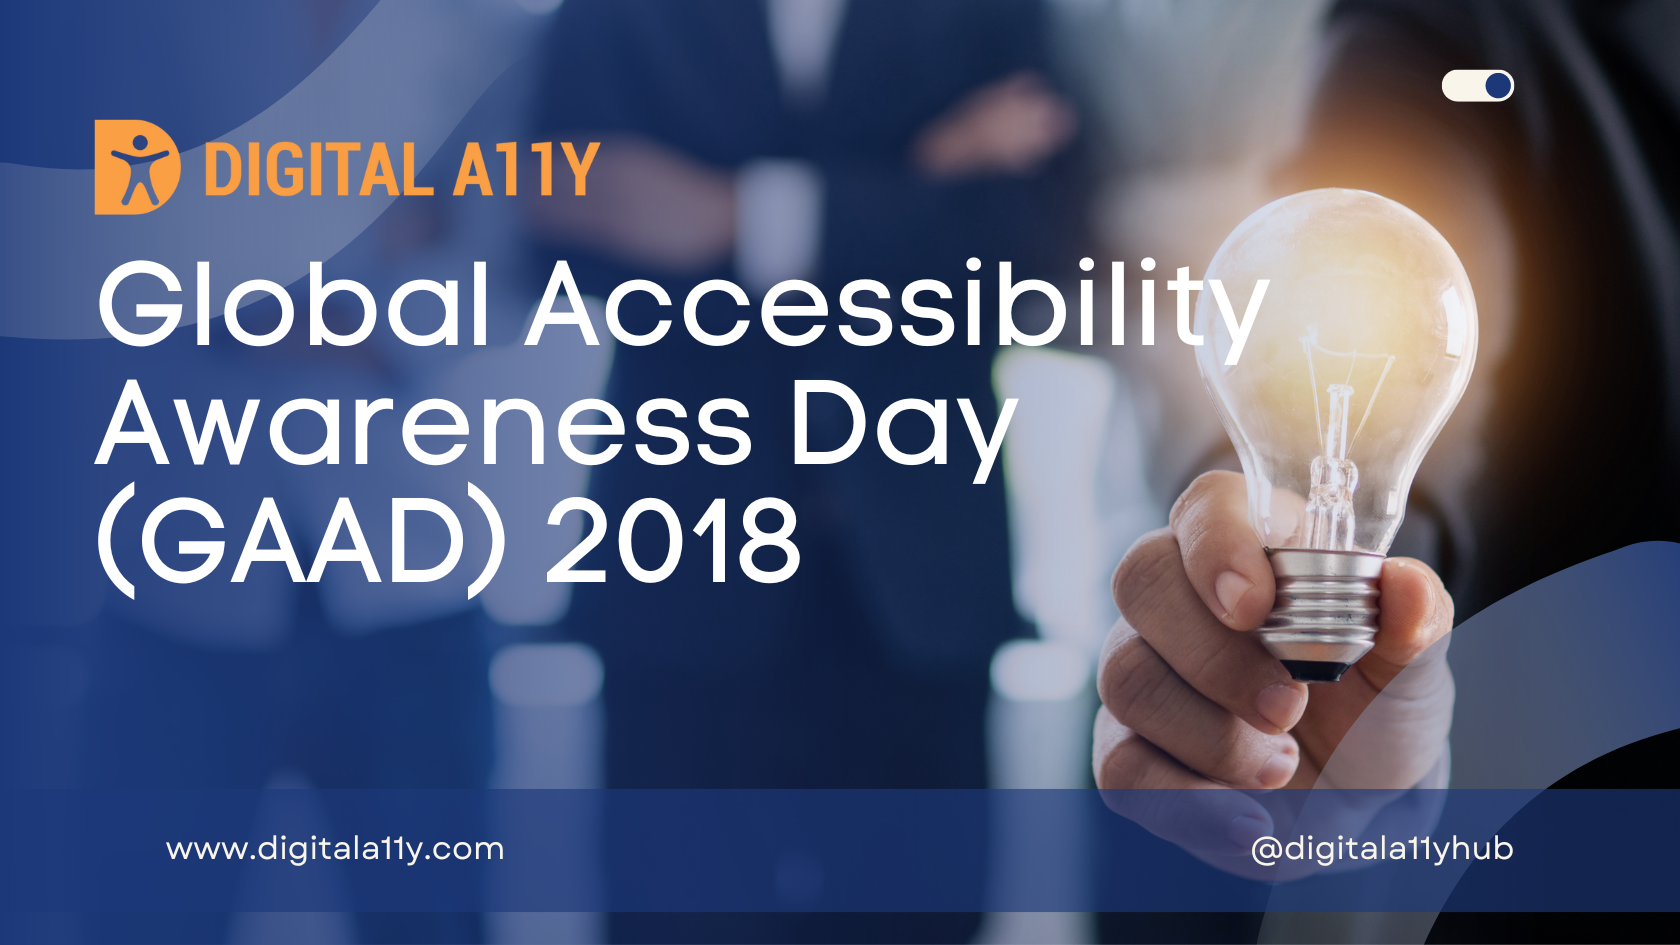 Global Accessibility Awareness Day (GAAD) 2018